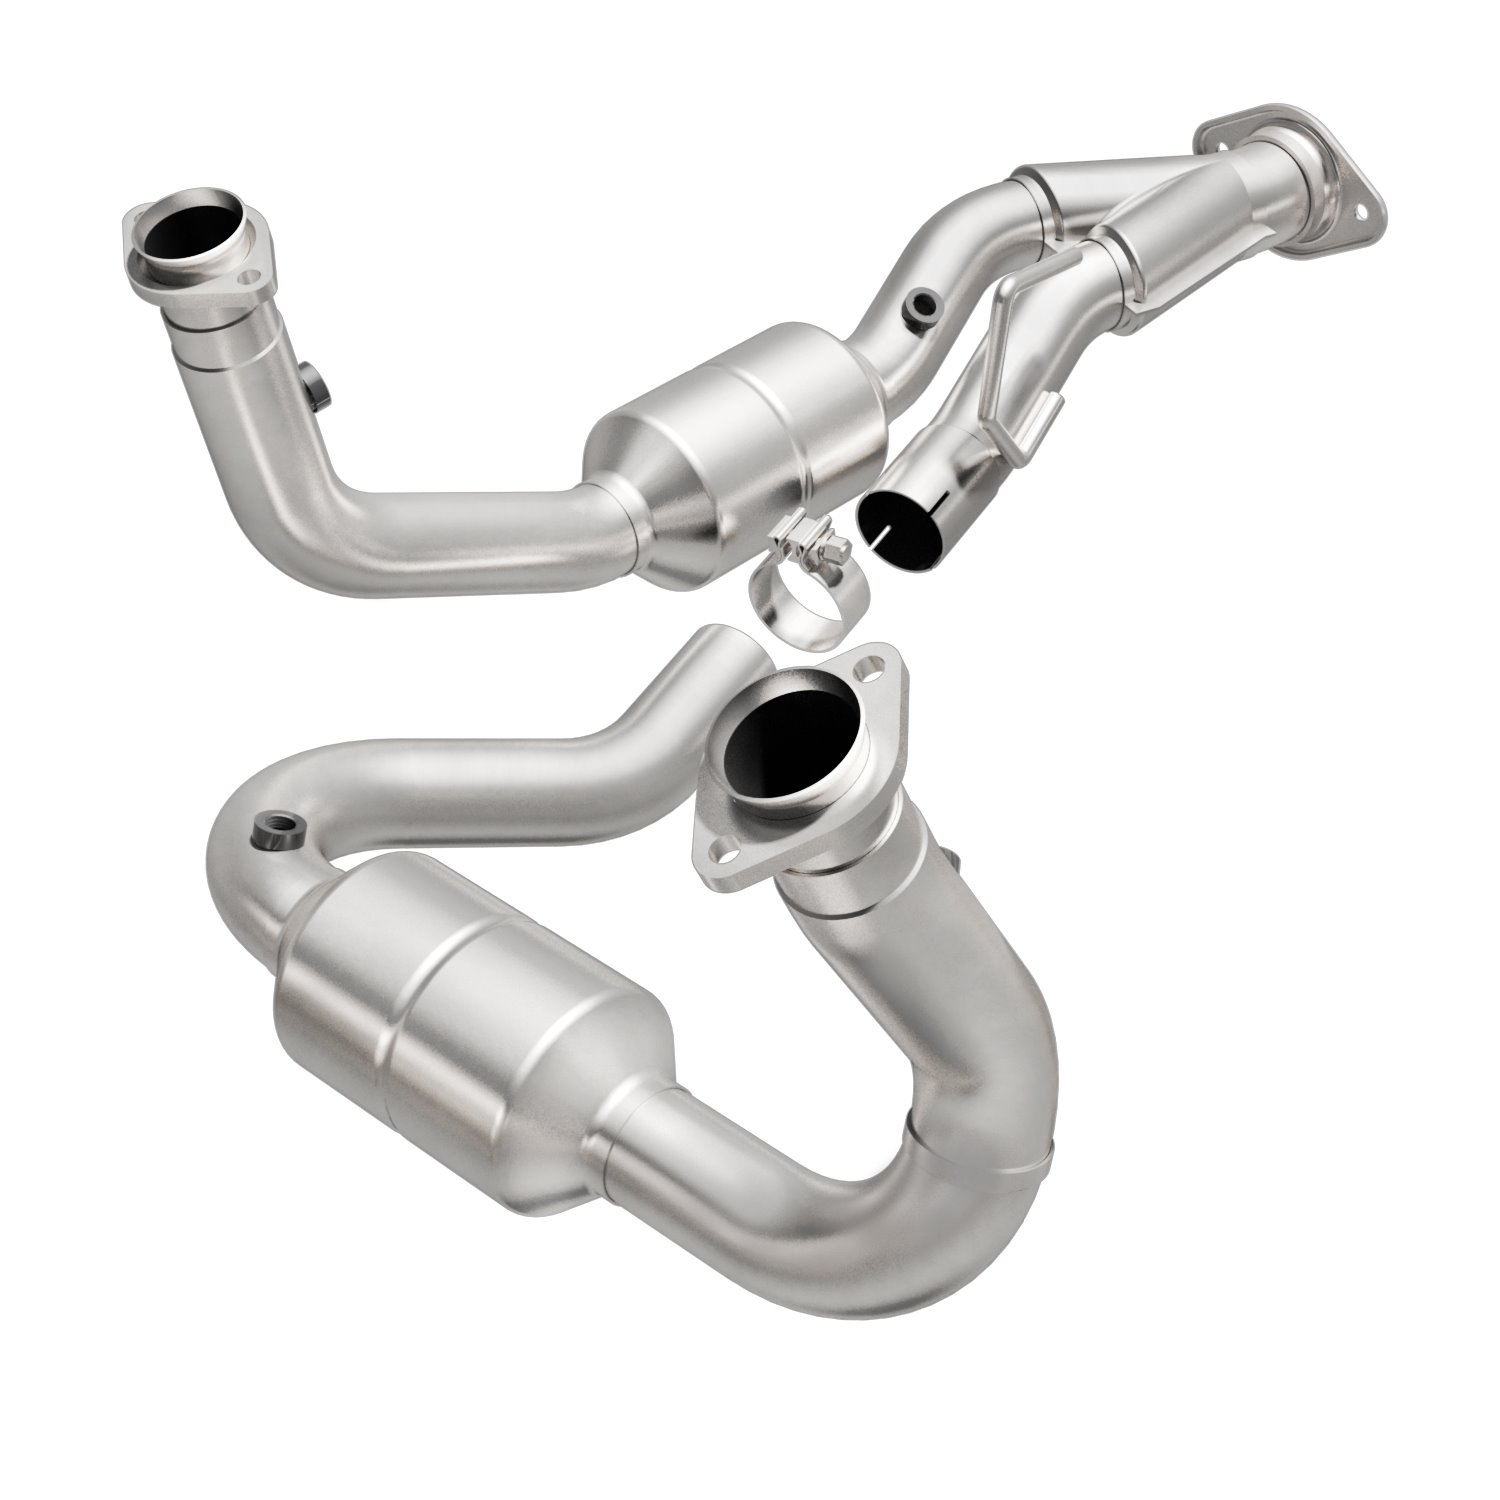 2005-2006 Jeep Grand Cherokee HM Grade Federal / EPA Compliant Direct-Fit Catalytic Converter